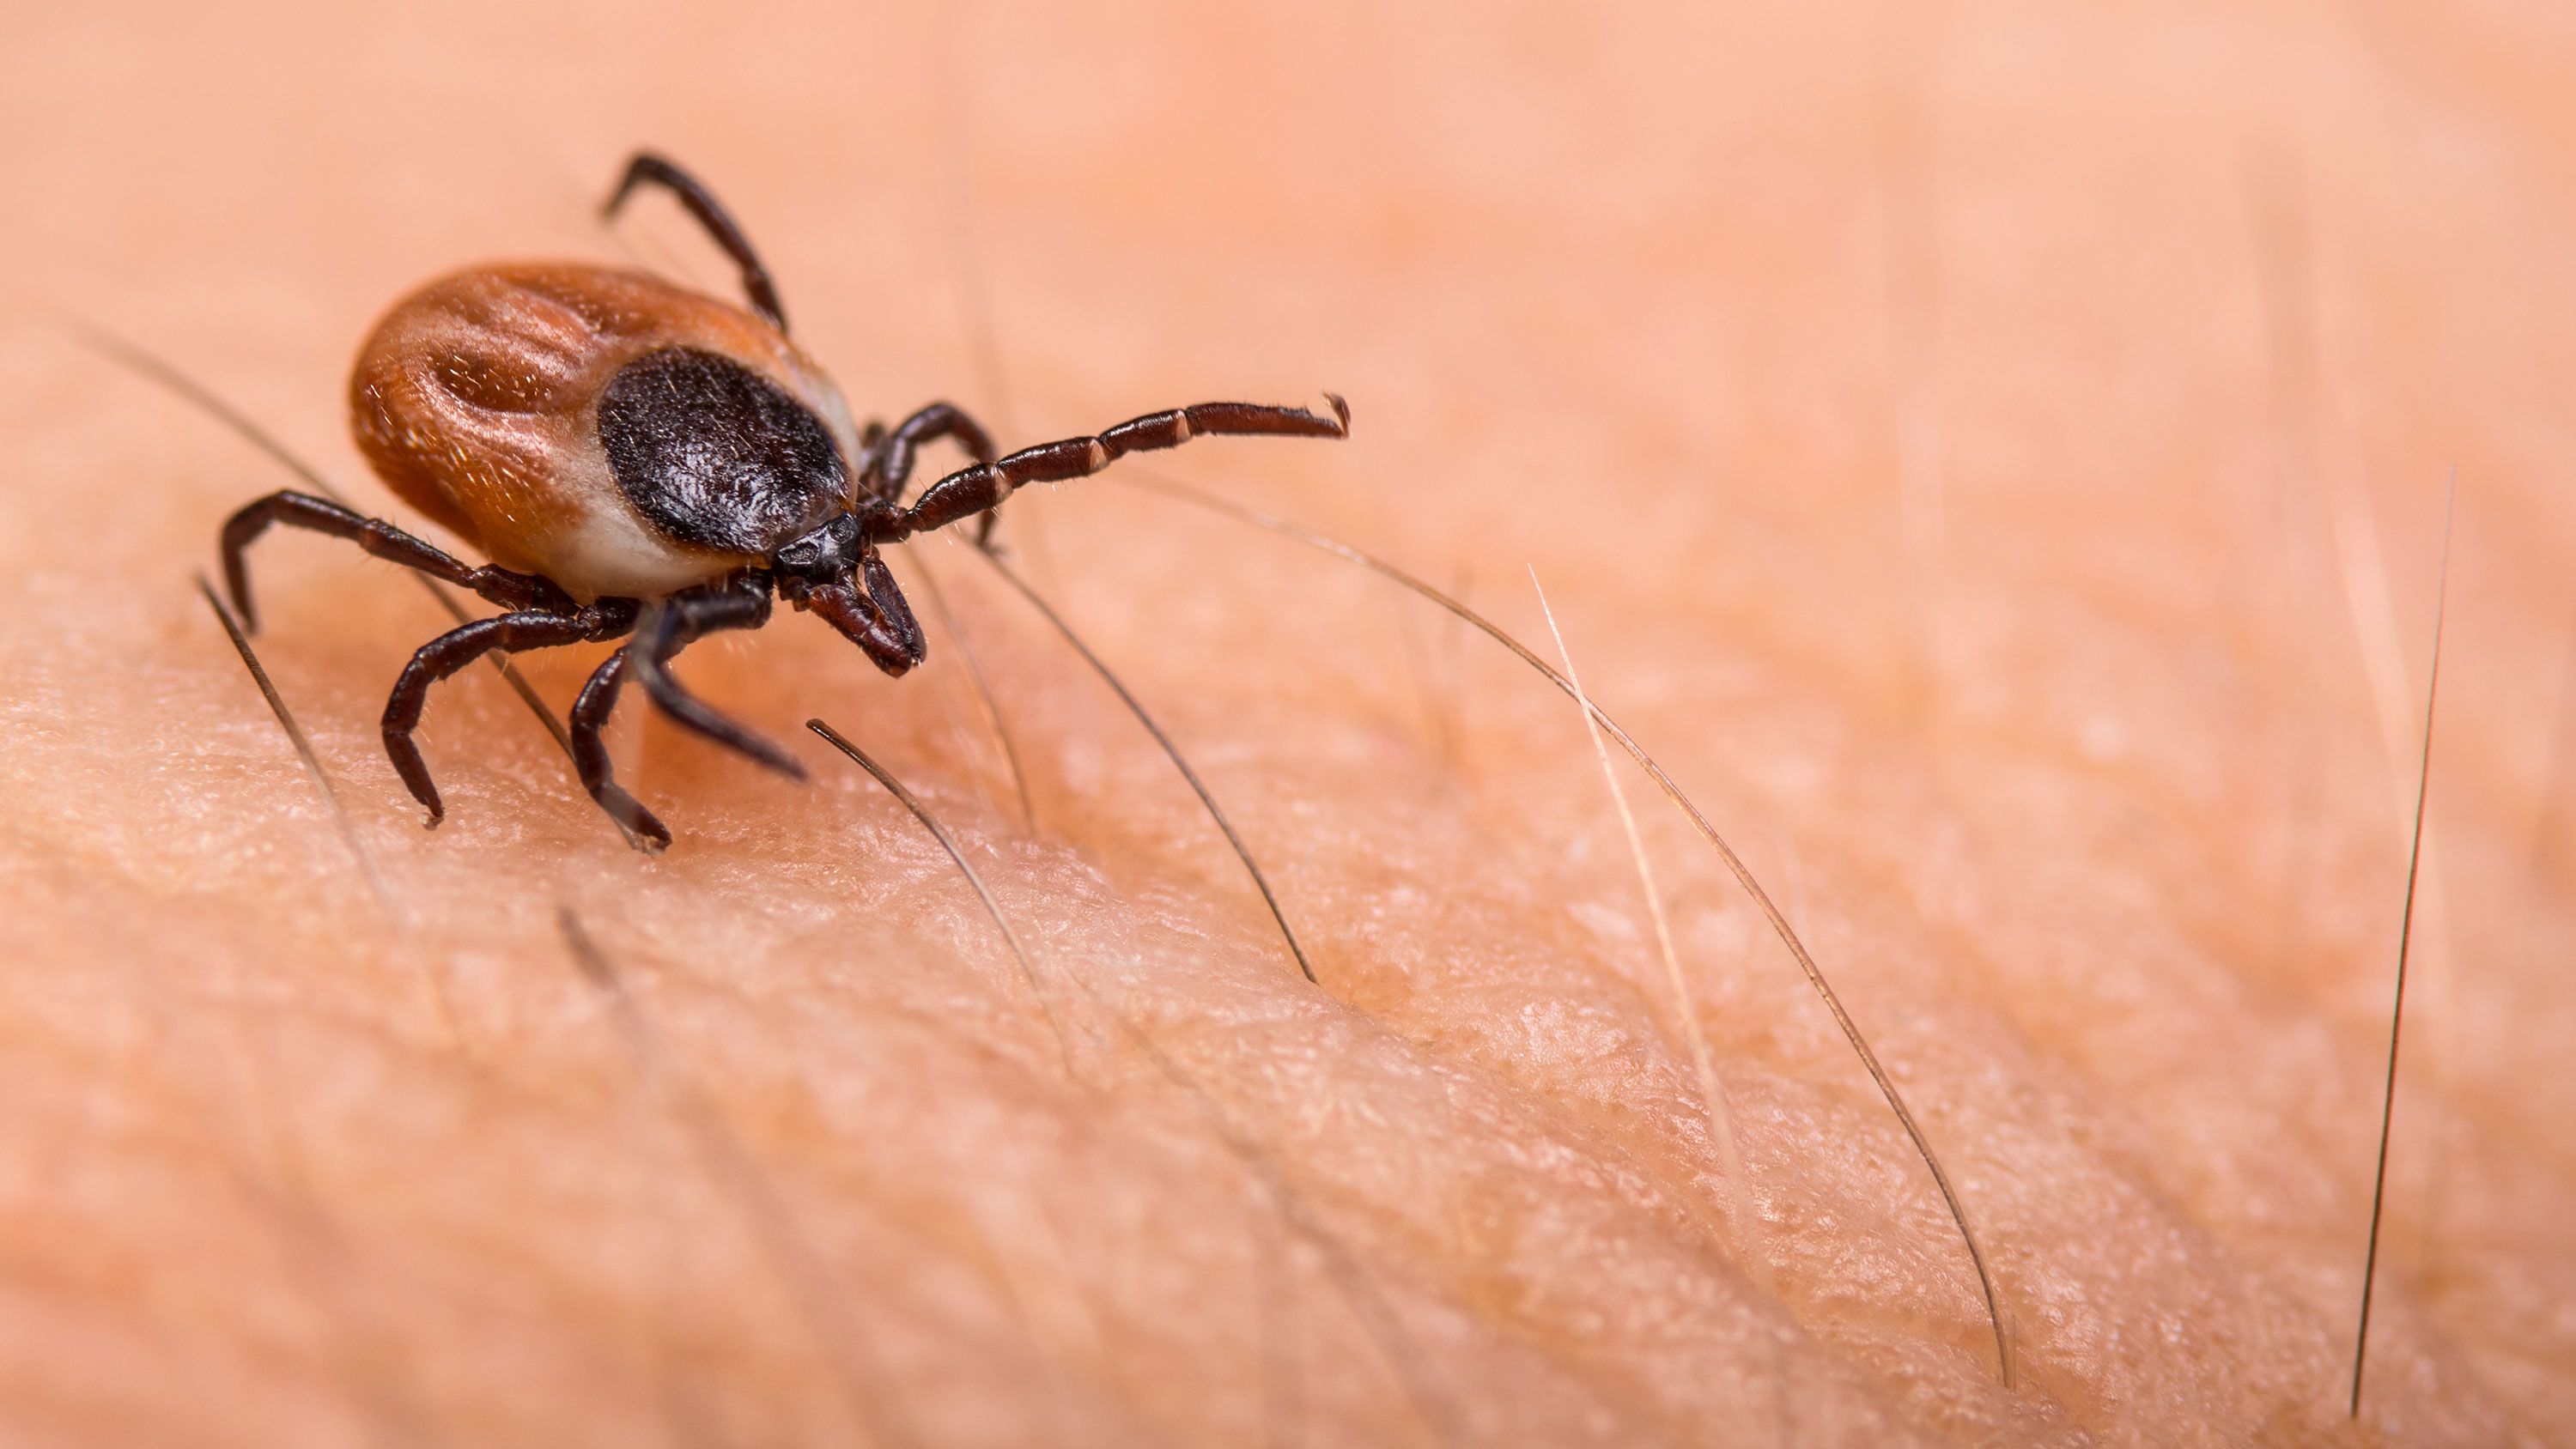 Tick season is here. Here's what you need to know